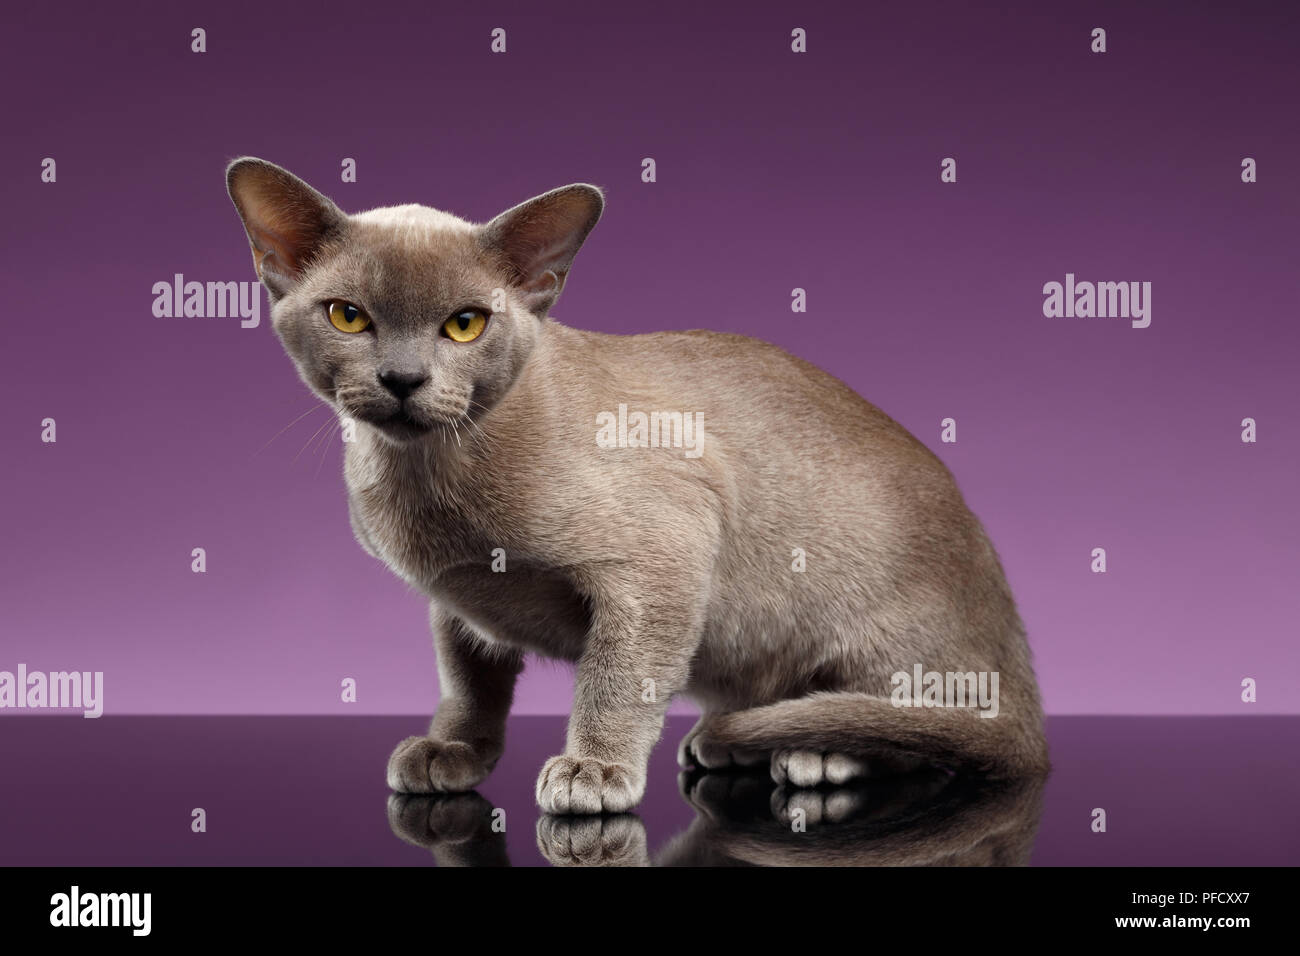 Burma Cat Sits and Loocking in Camera on purple background Stock Photo